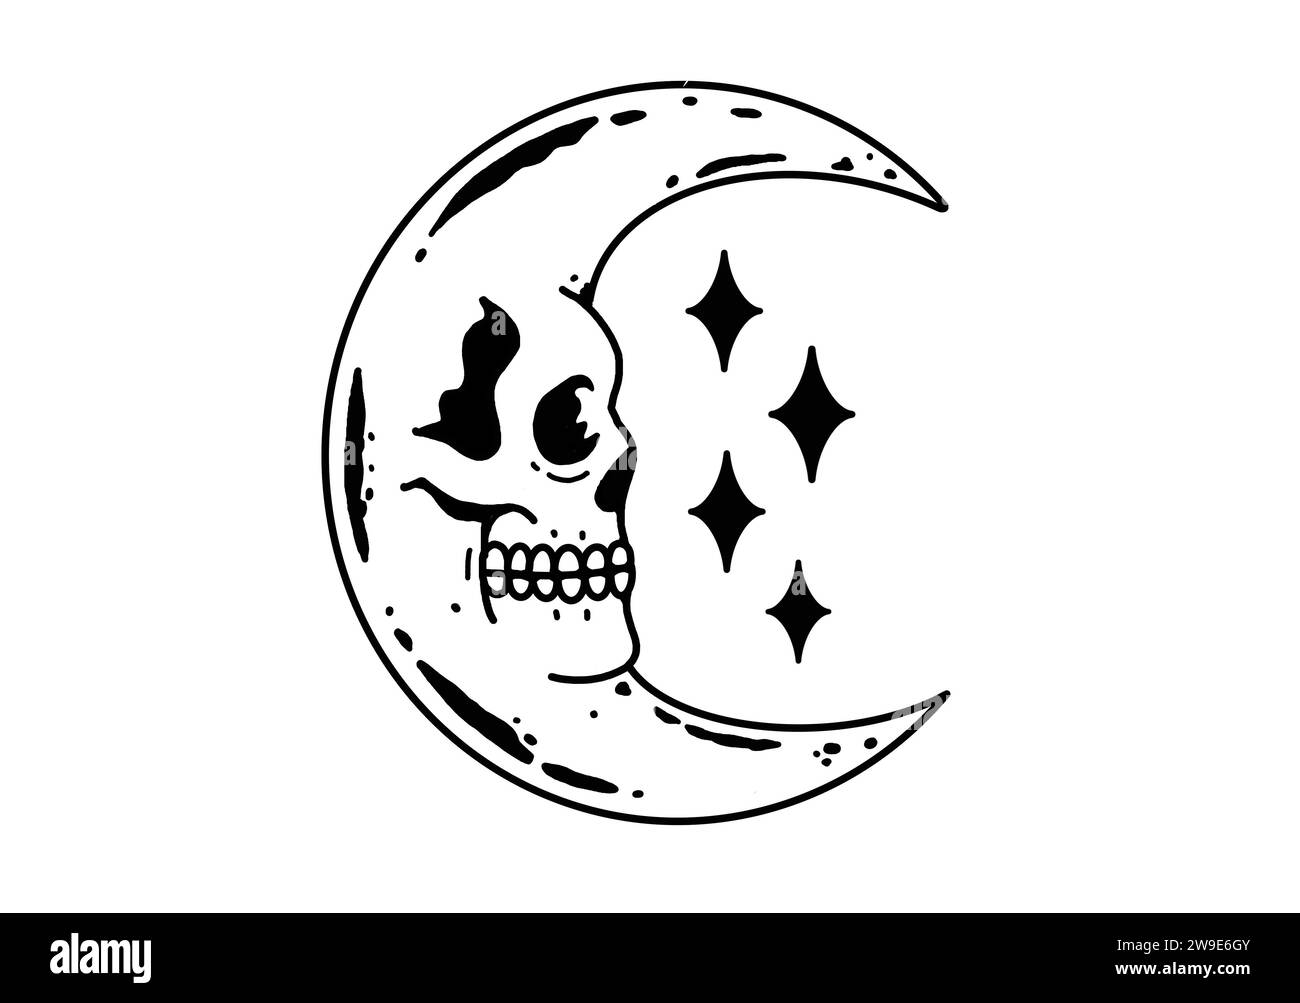 Luna half moon with skull face black and white design Stock Photo